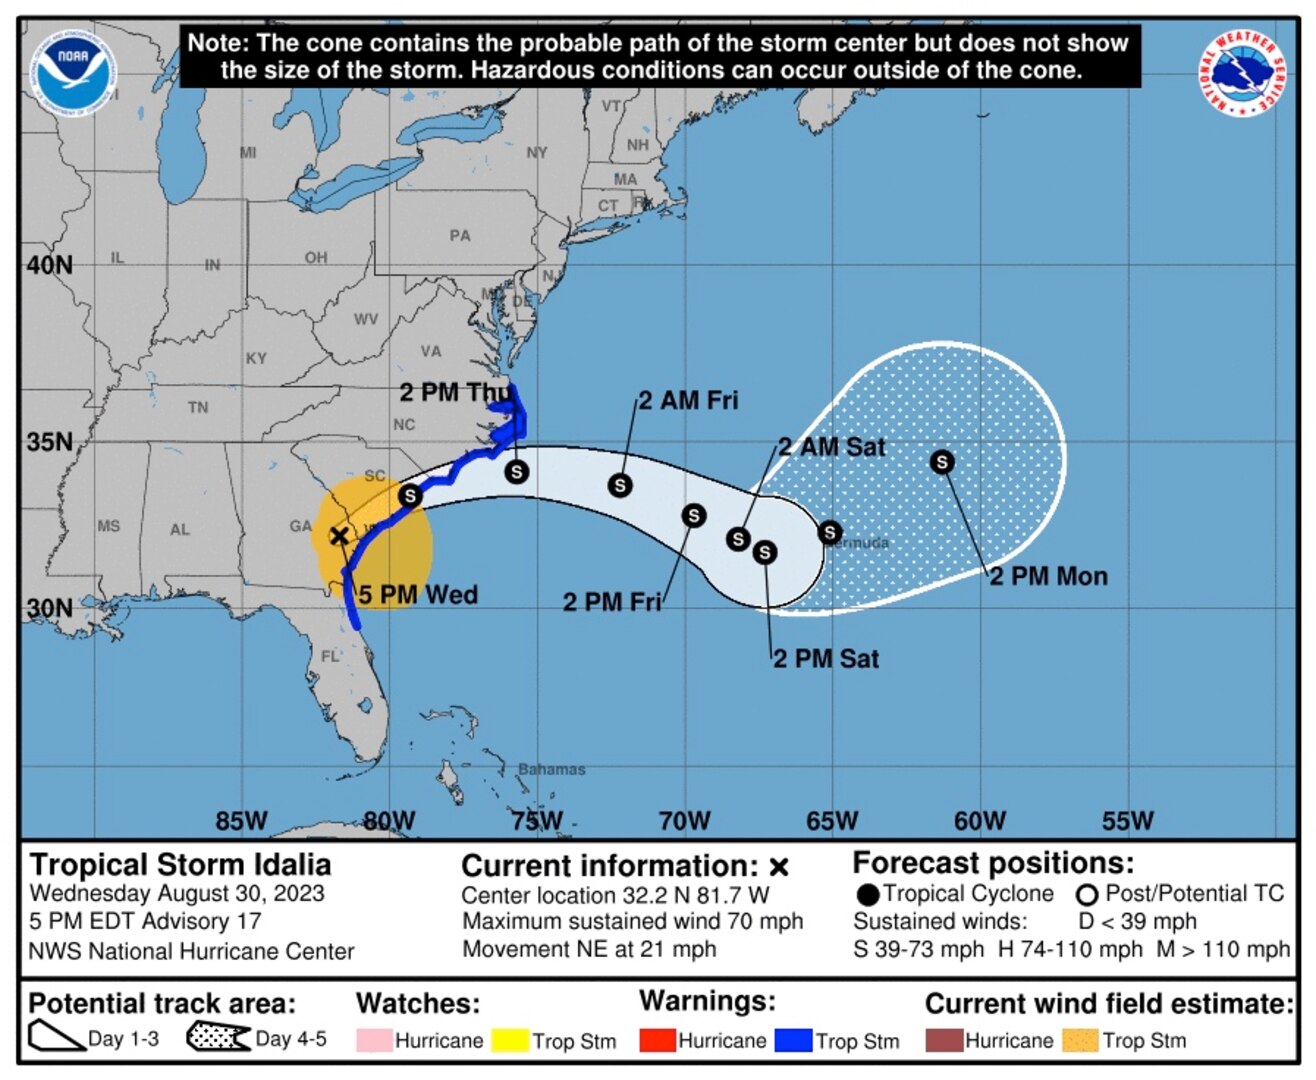 The Coast Guard reminds mariners and residents of Georgia and South Carolina to remain vigilant as Tropical Storm Idalia continues to the eastern seaboard, Wednesday.  

Idalia was downgraded from a Hurricane to a Tropical Storm as it crossed the Florida Peninsula into Georgia.  

The extent of damage to impacted areas is still being assessed by federal, state and local emergency responders. The Seventh Coast Guard District is staged and prepared to deploy rescue crews to assist those in distress as soon as safely possible.